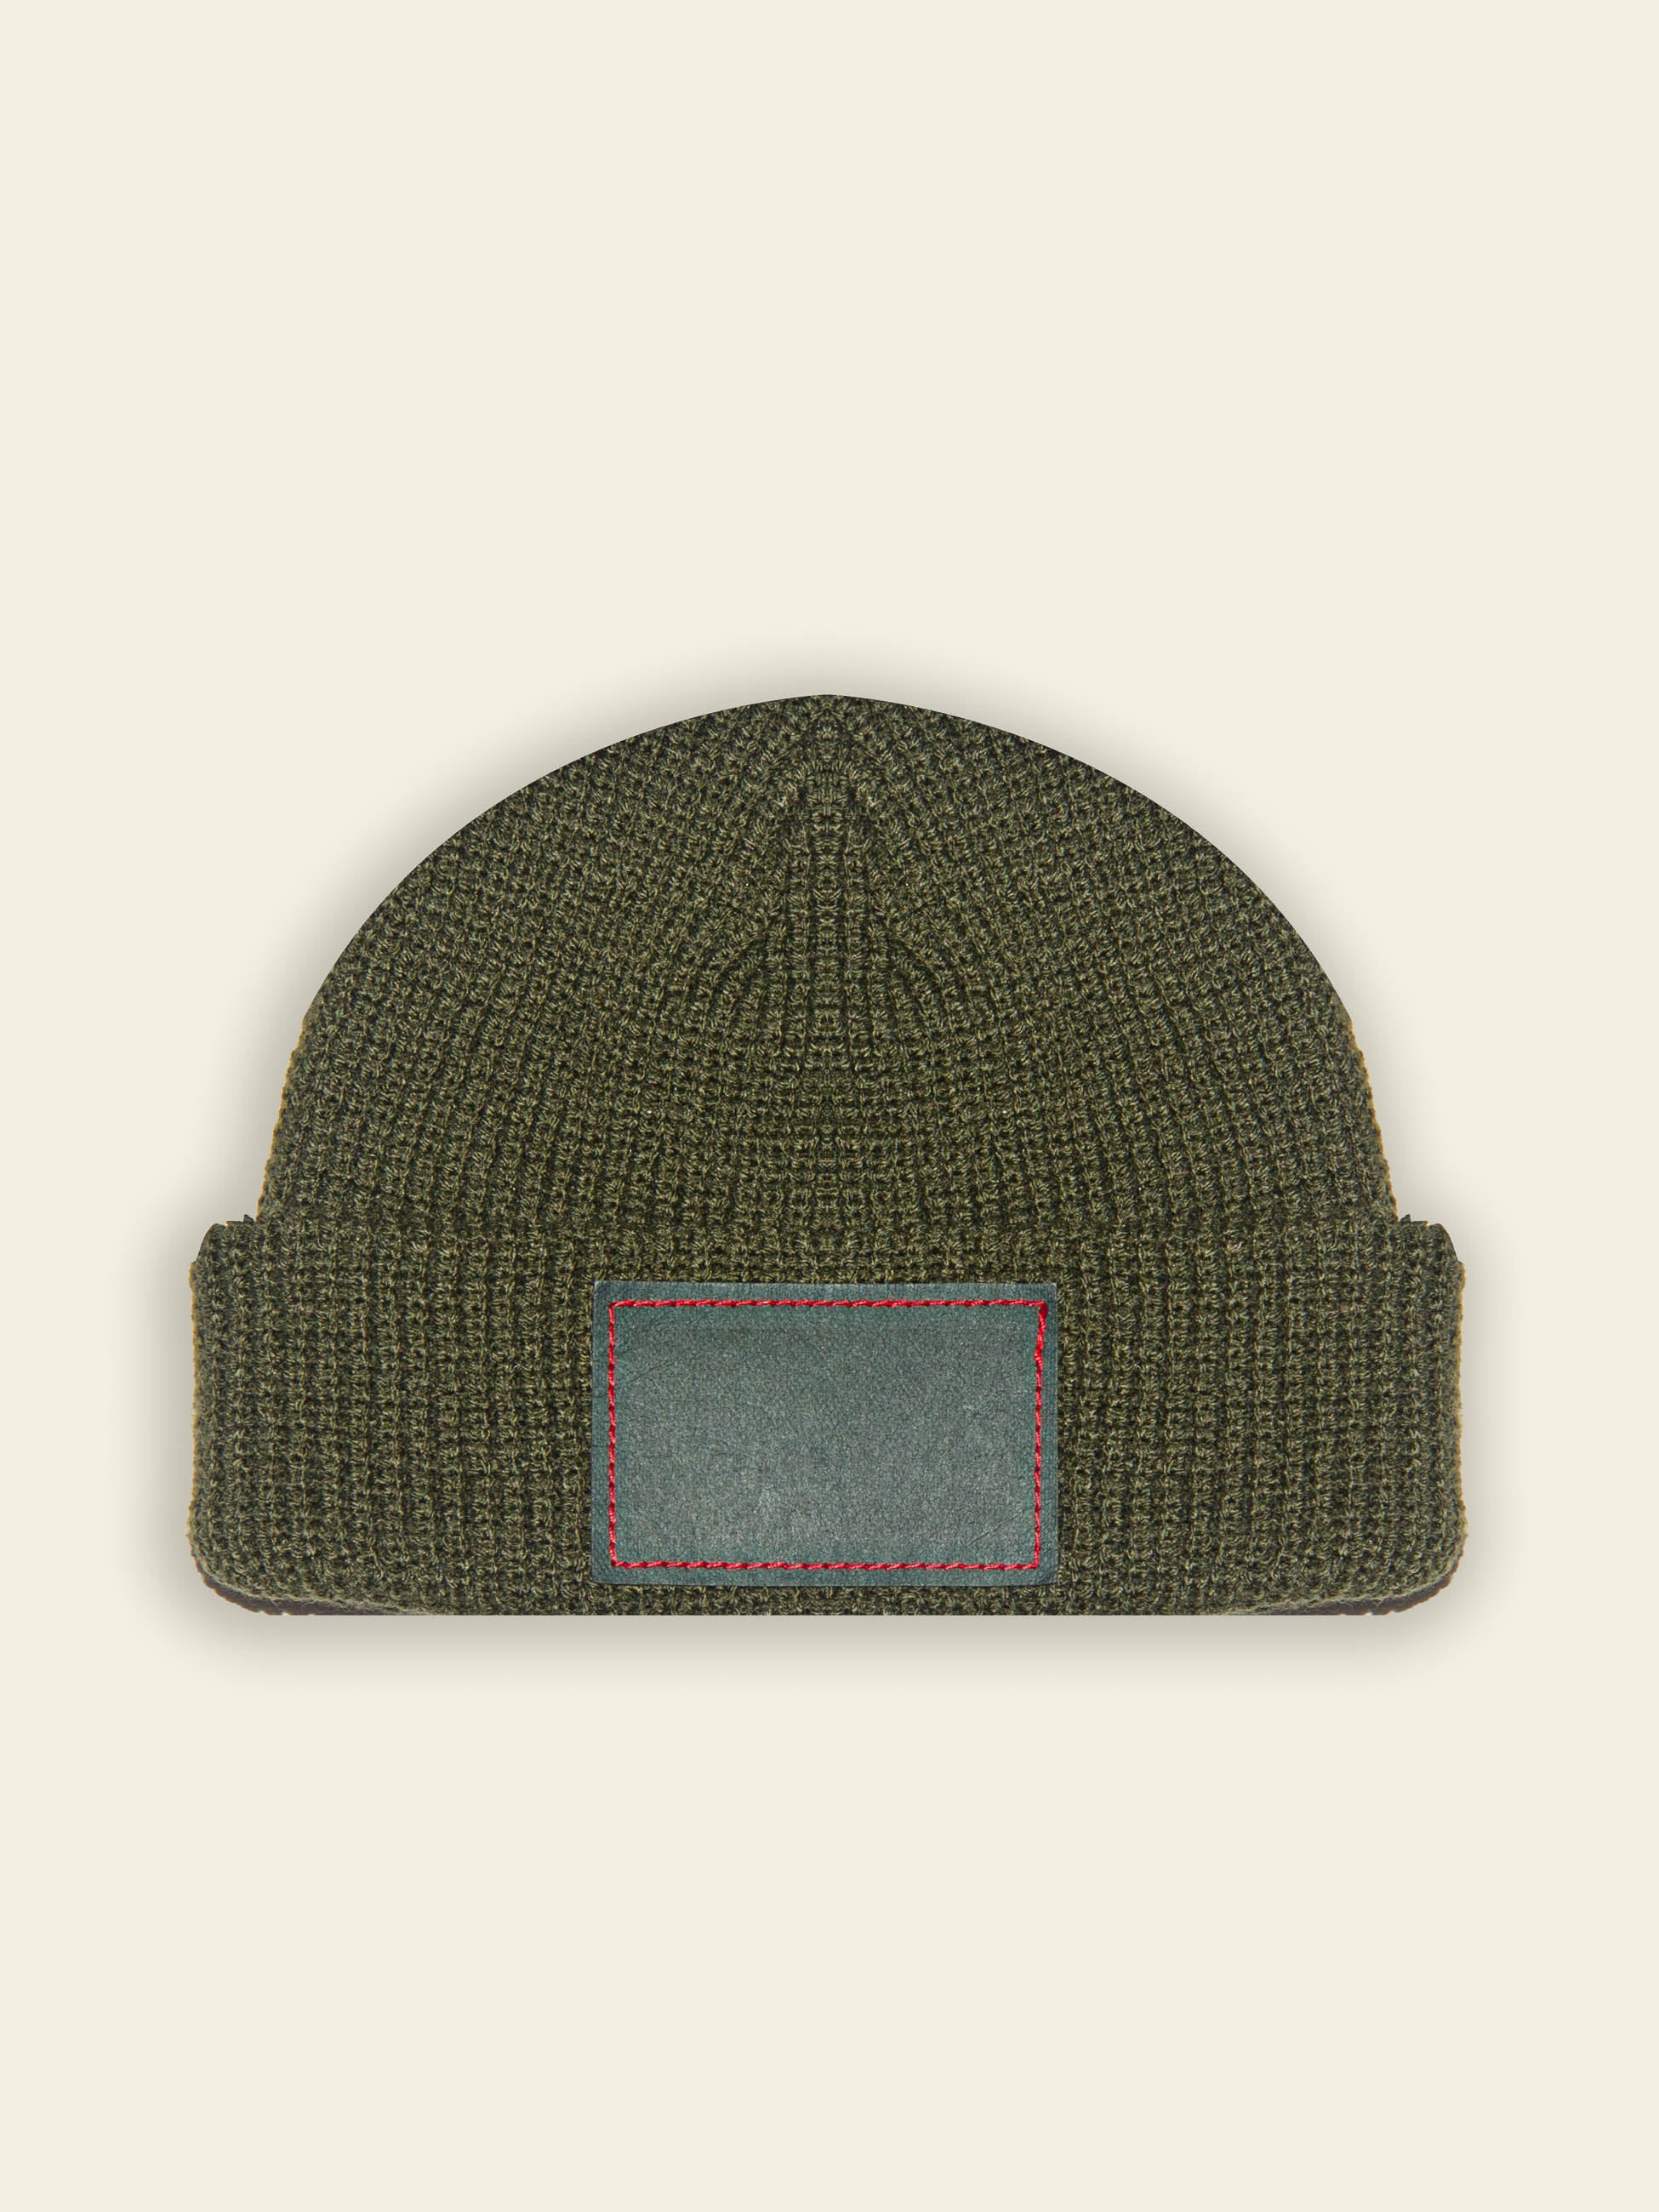 Publik Brand Fisherman Beanie Reseda Green, all made in USA, Front